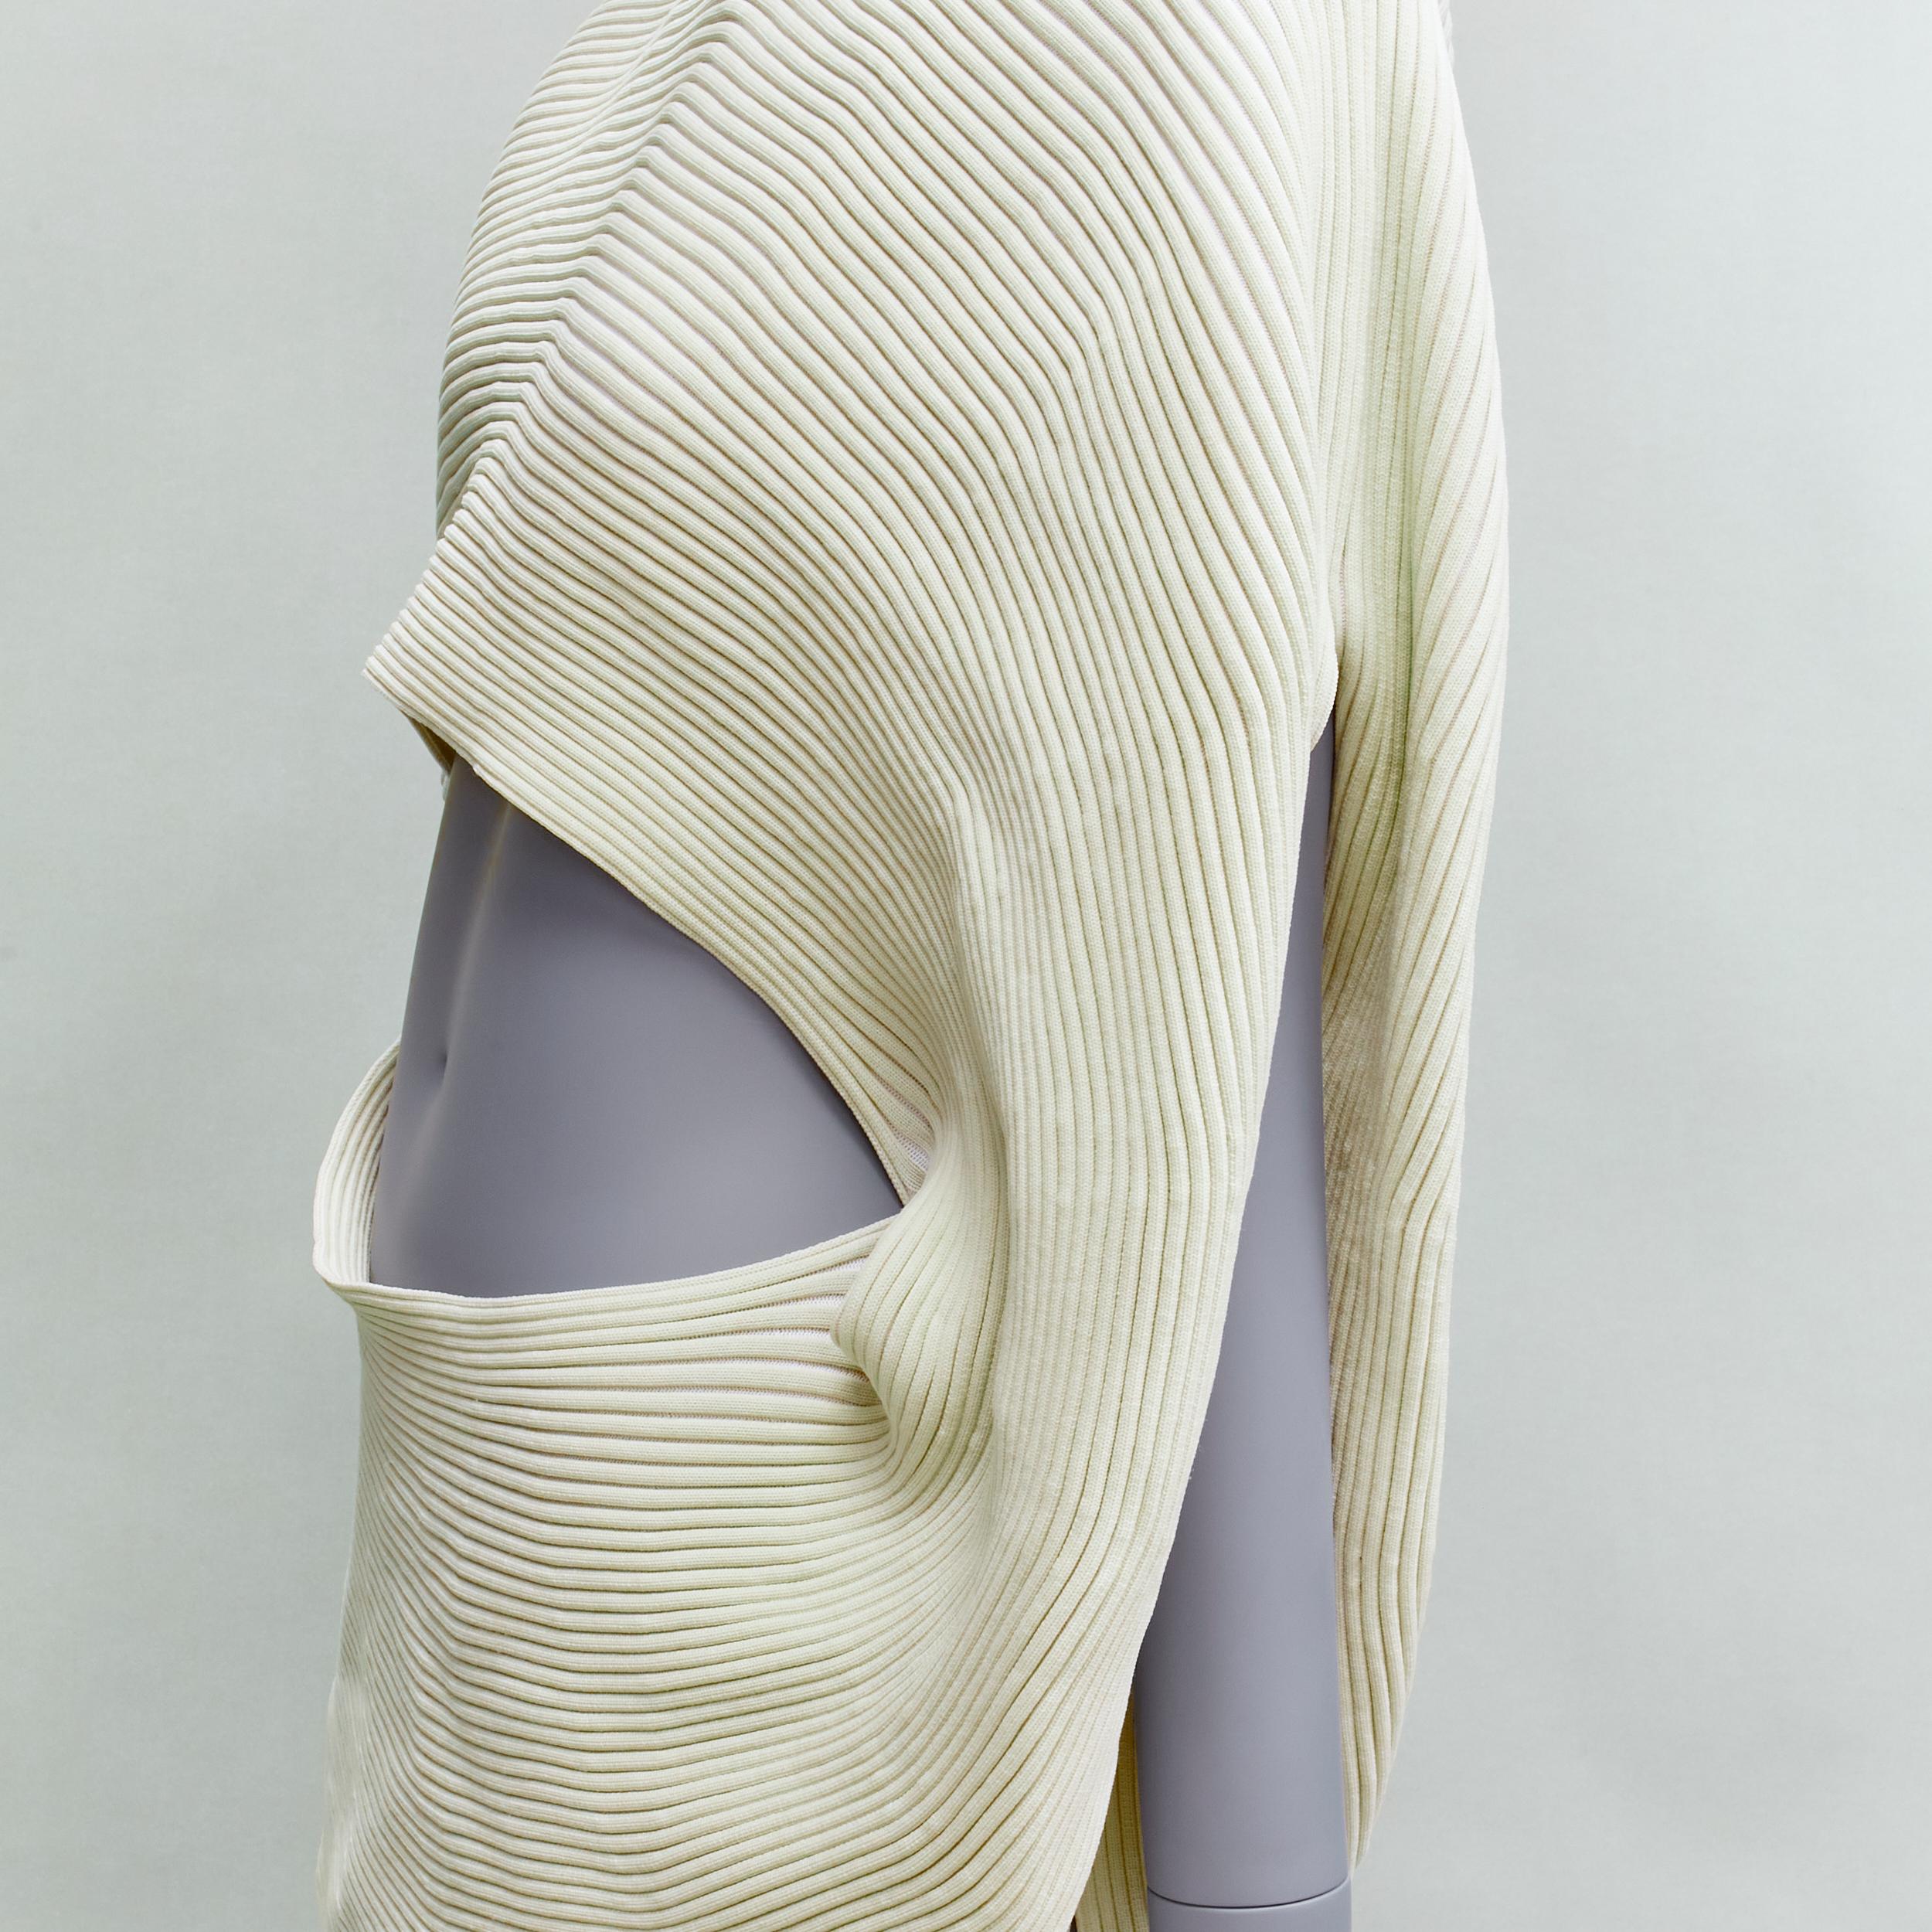 ISSEY MIYAKE 2022 Runway cream ribbed knit asymmetric 3D circle midriff cutout top JP2 M
Reference: TGAS/D00123
Brand: Issey Miyake
Collection: Spring 2022
Material: Polyester
Color: Cream
Pattern: Solid
Closure: Slip On
Made in: